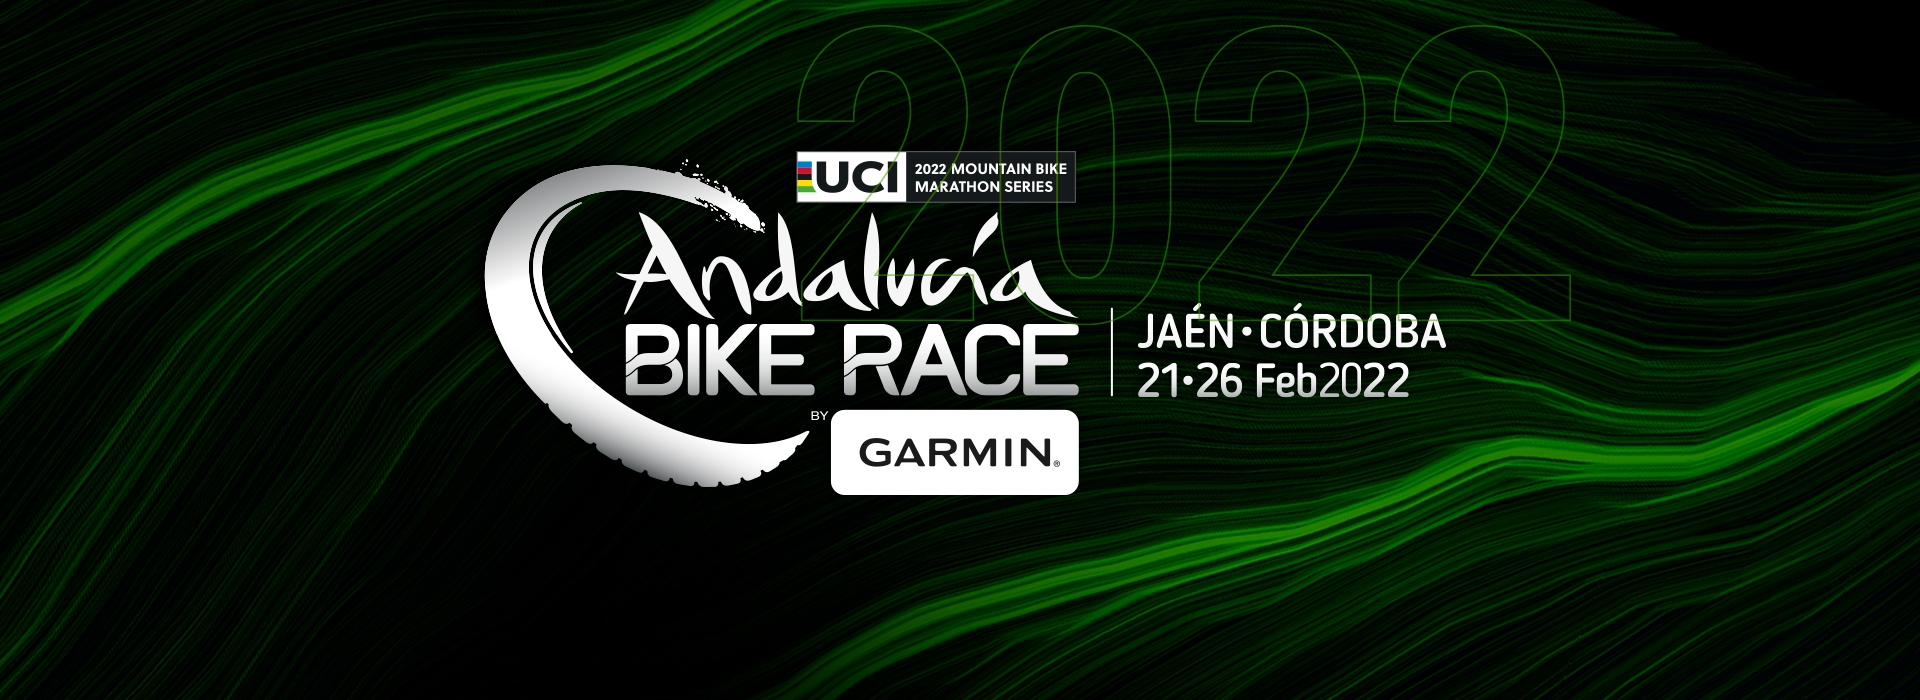 Andalucía Bike Race by Garmin will be held from 21 to 26 February 2022.